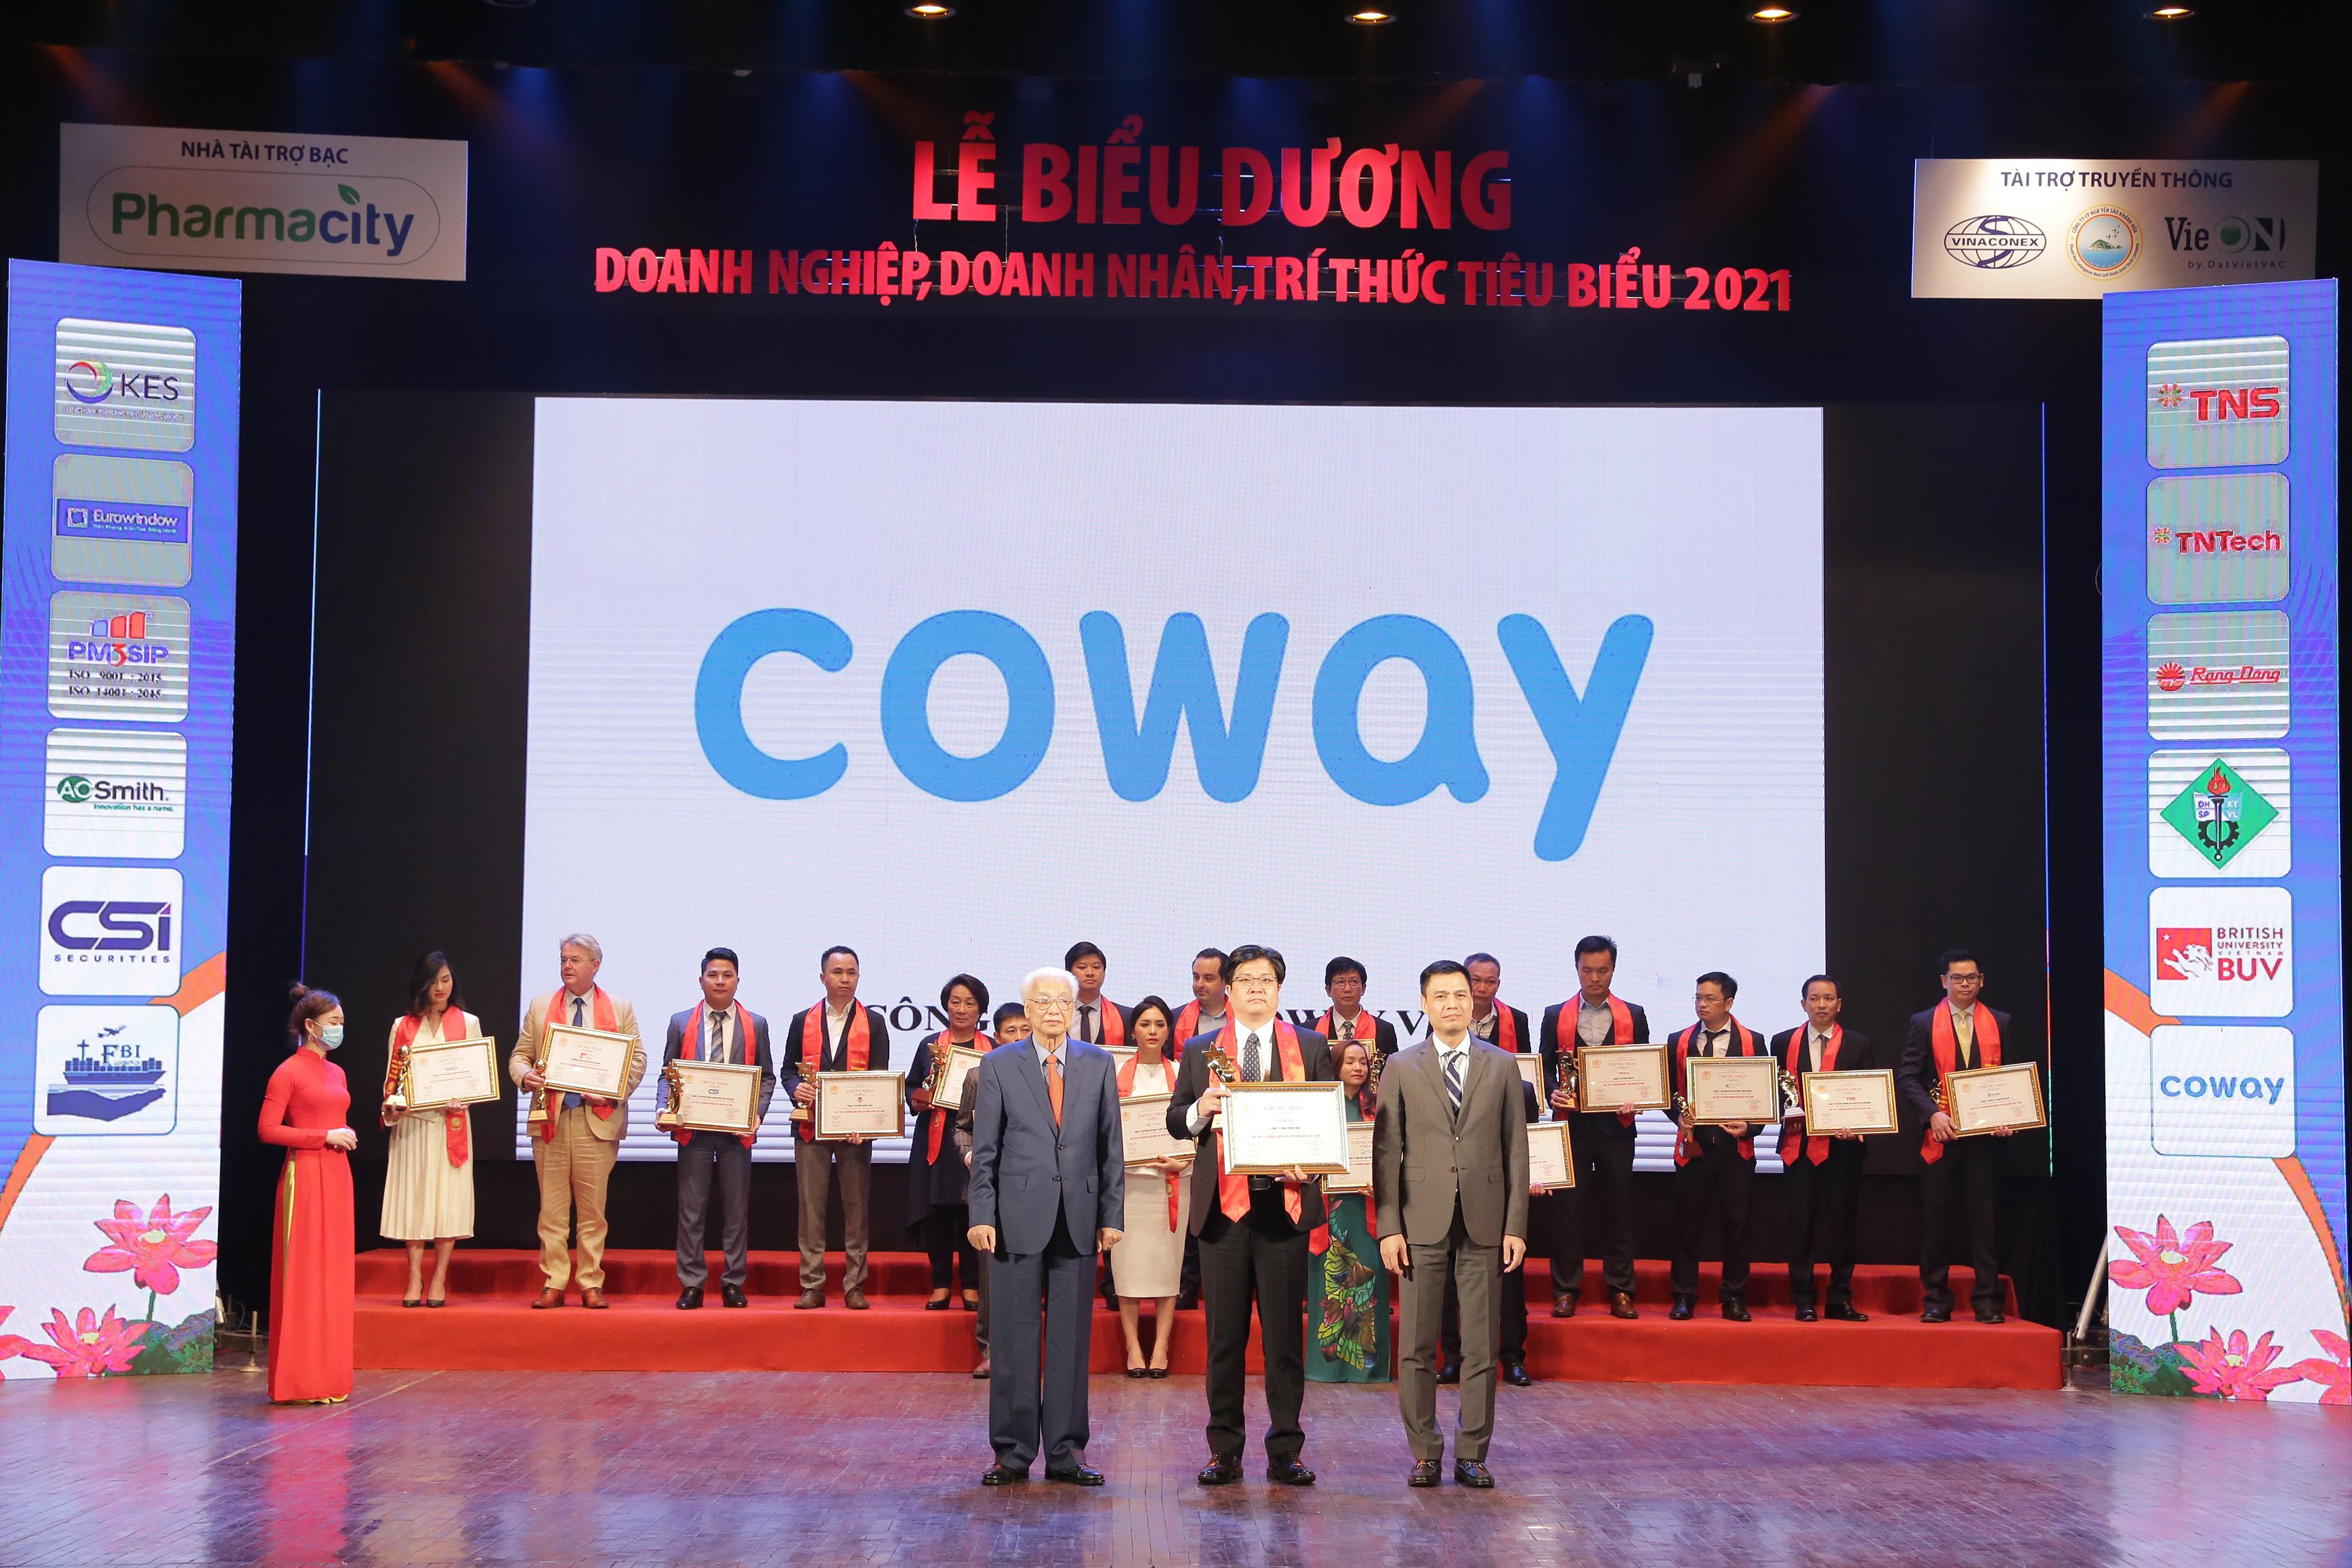 Coway Vina was honored in the Top 10 Vietnam Most Trusted Brands 2021